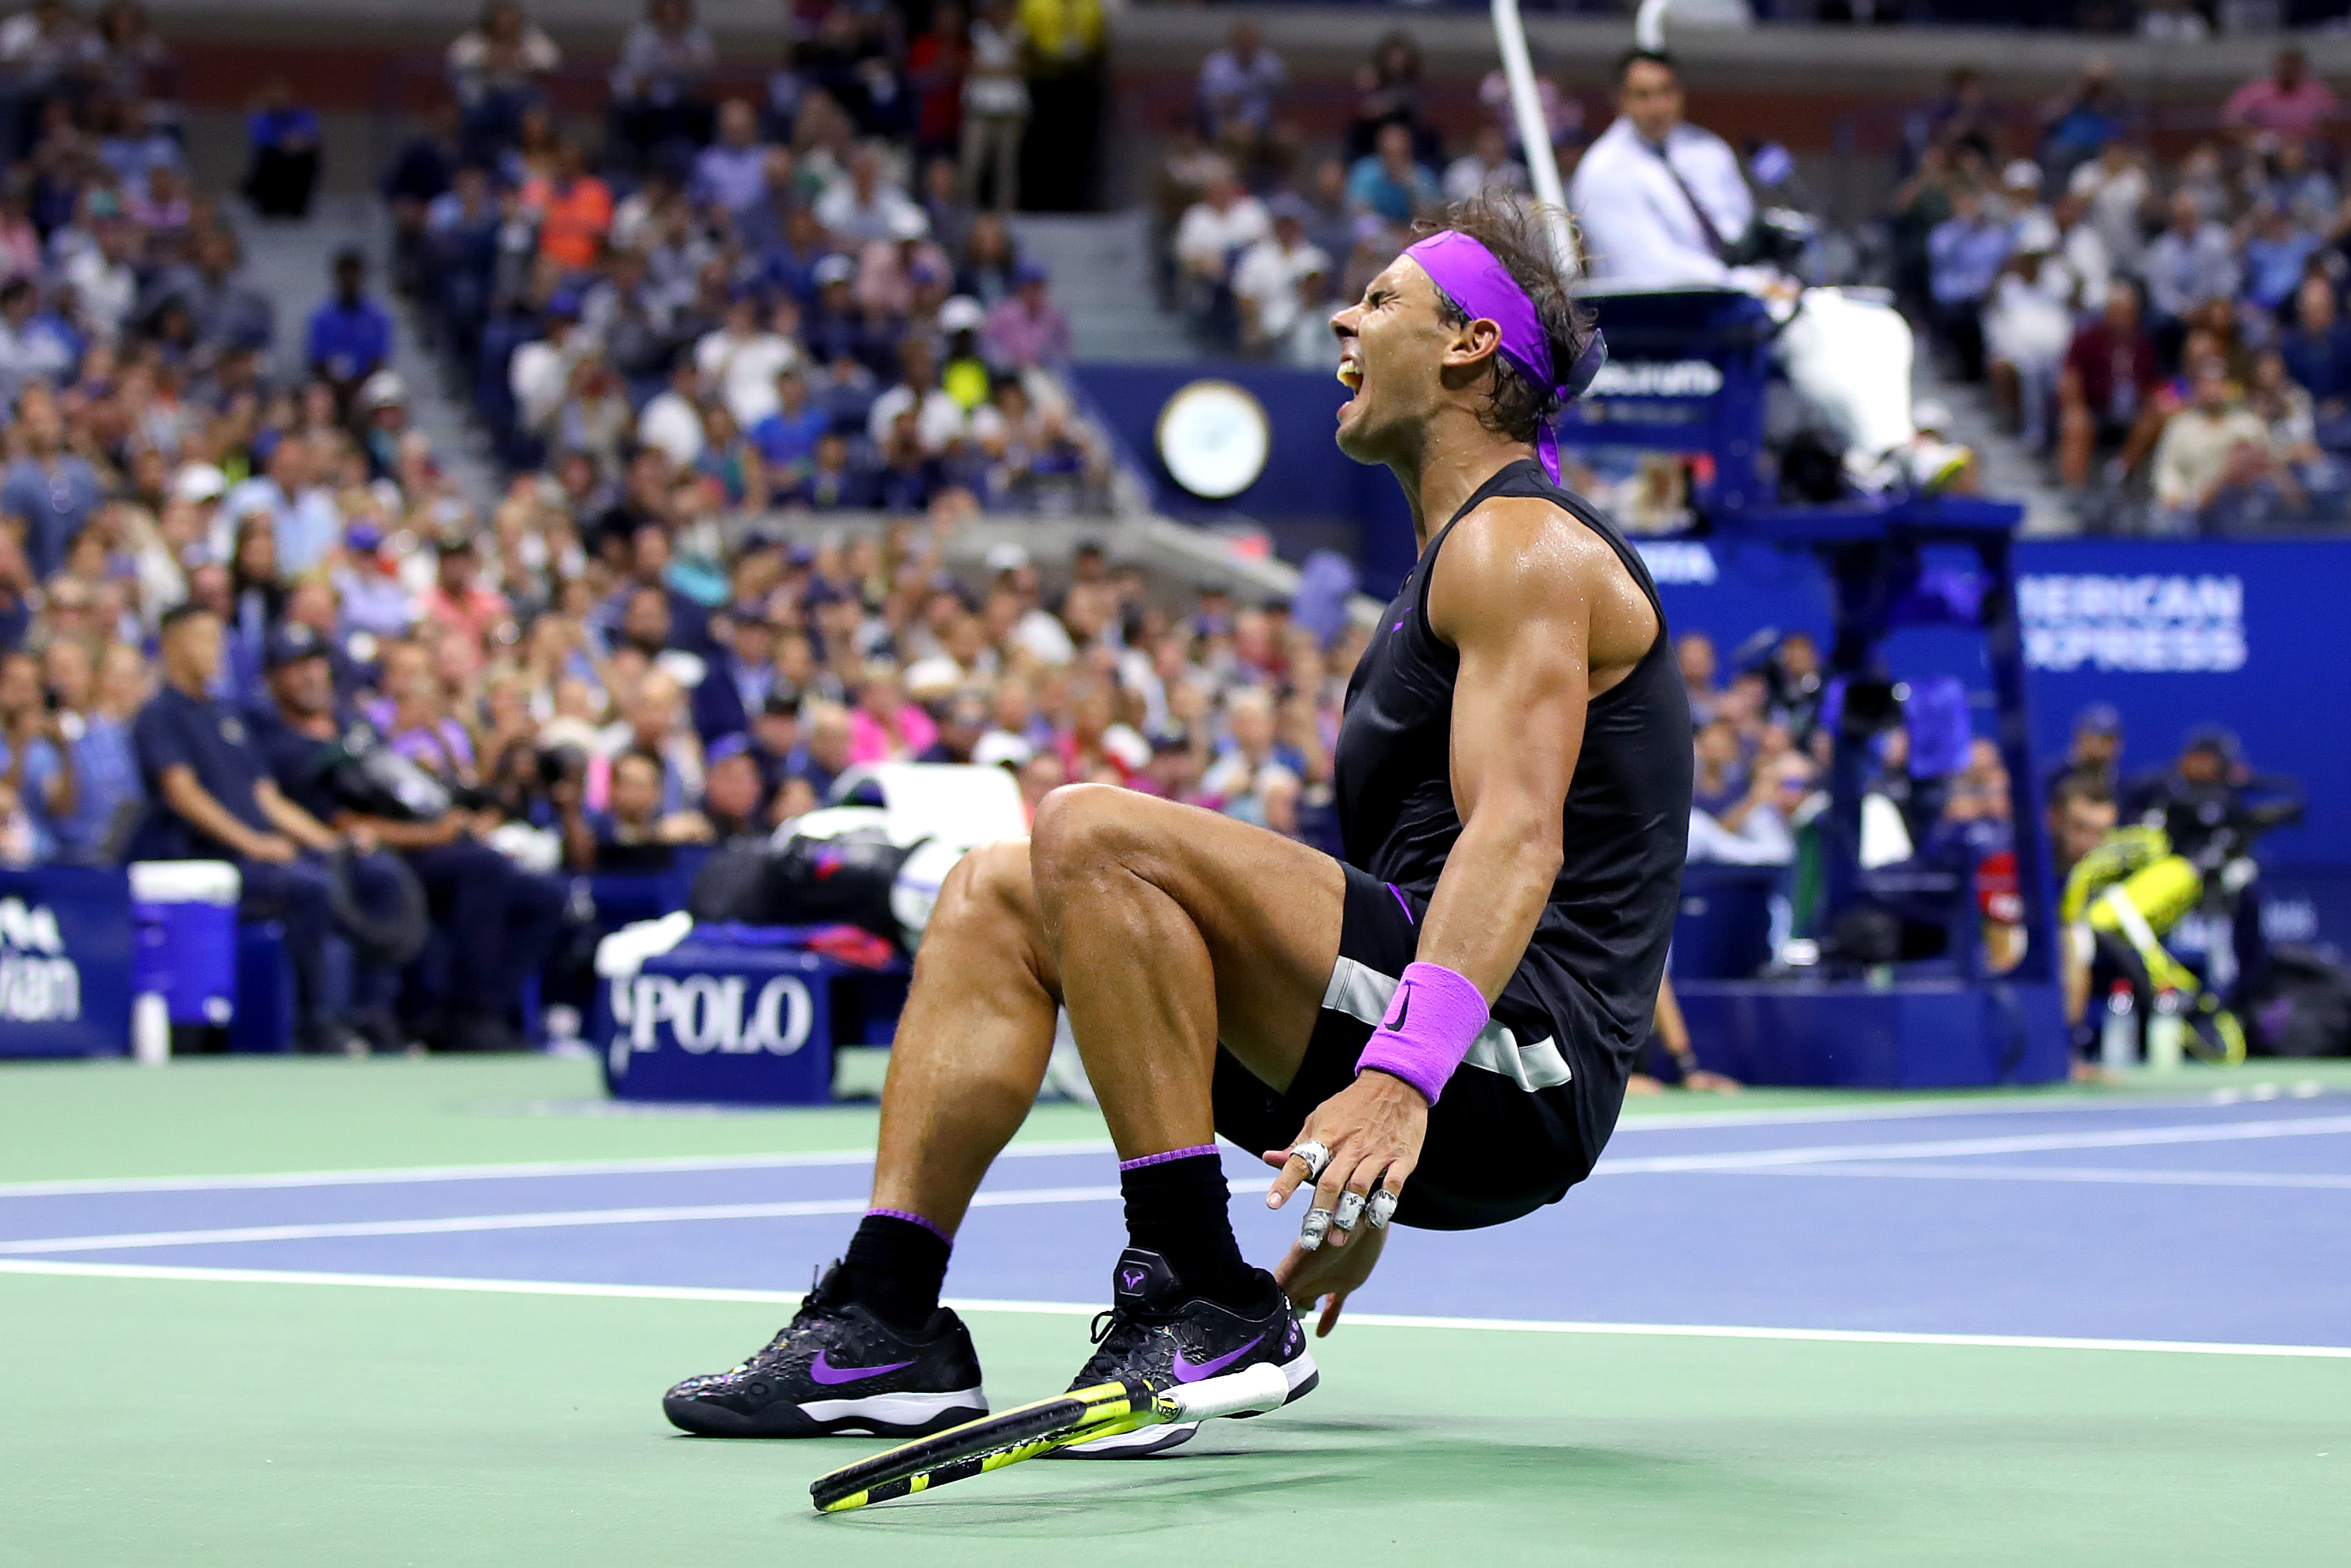 2019 Matches, No. 3: Nadal d. Medvedev, US Open final